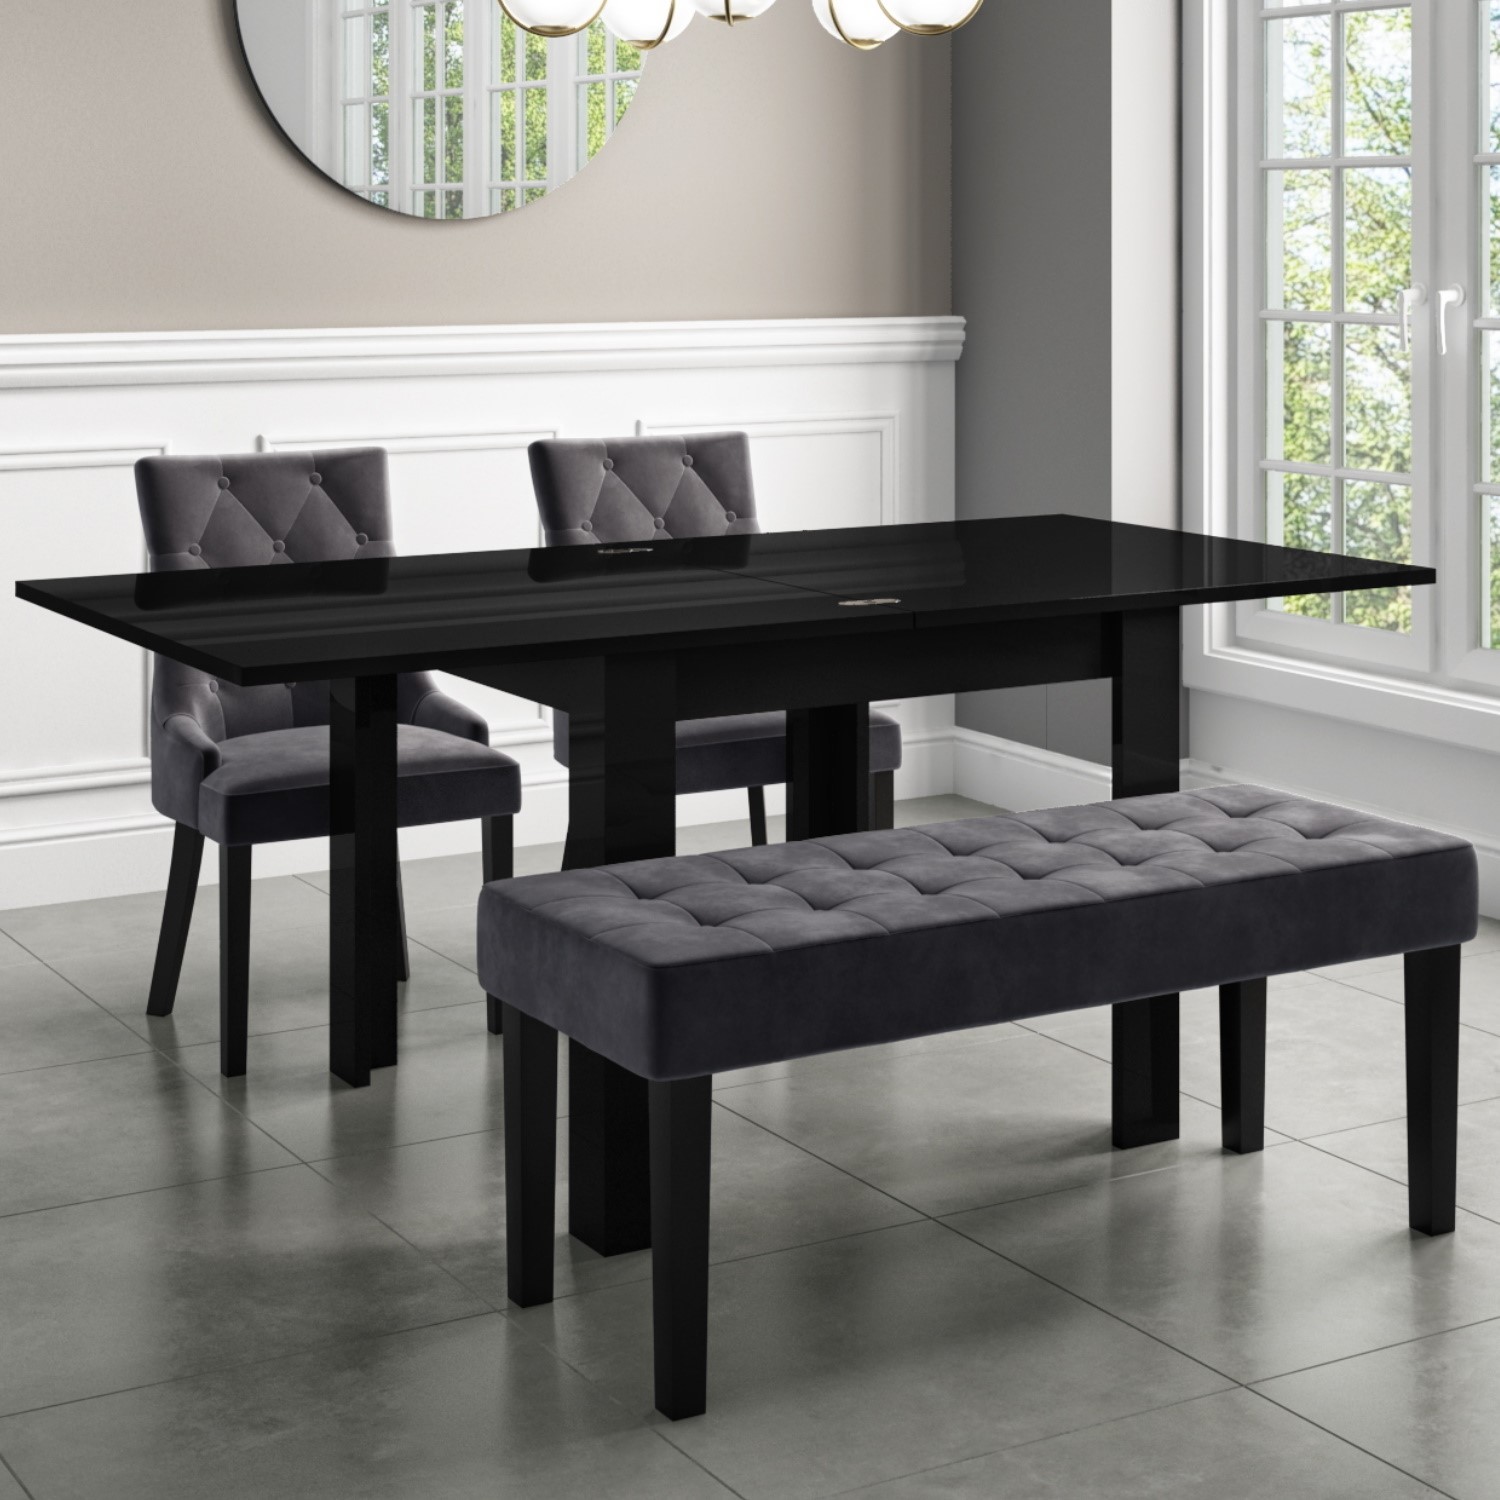 Flip Top Dining Table In Black High, Black Dining Table Bench